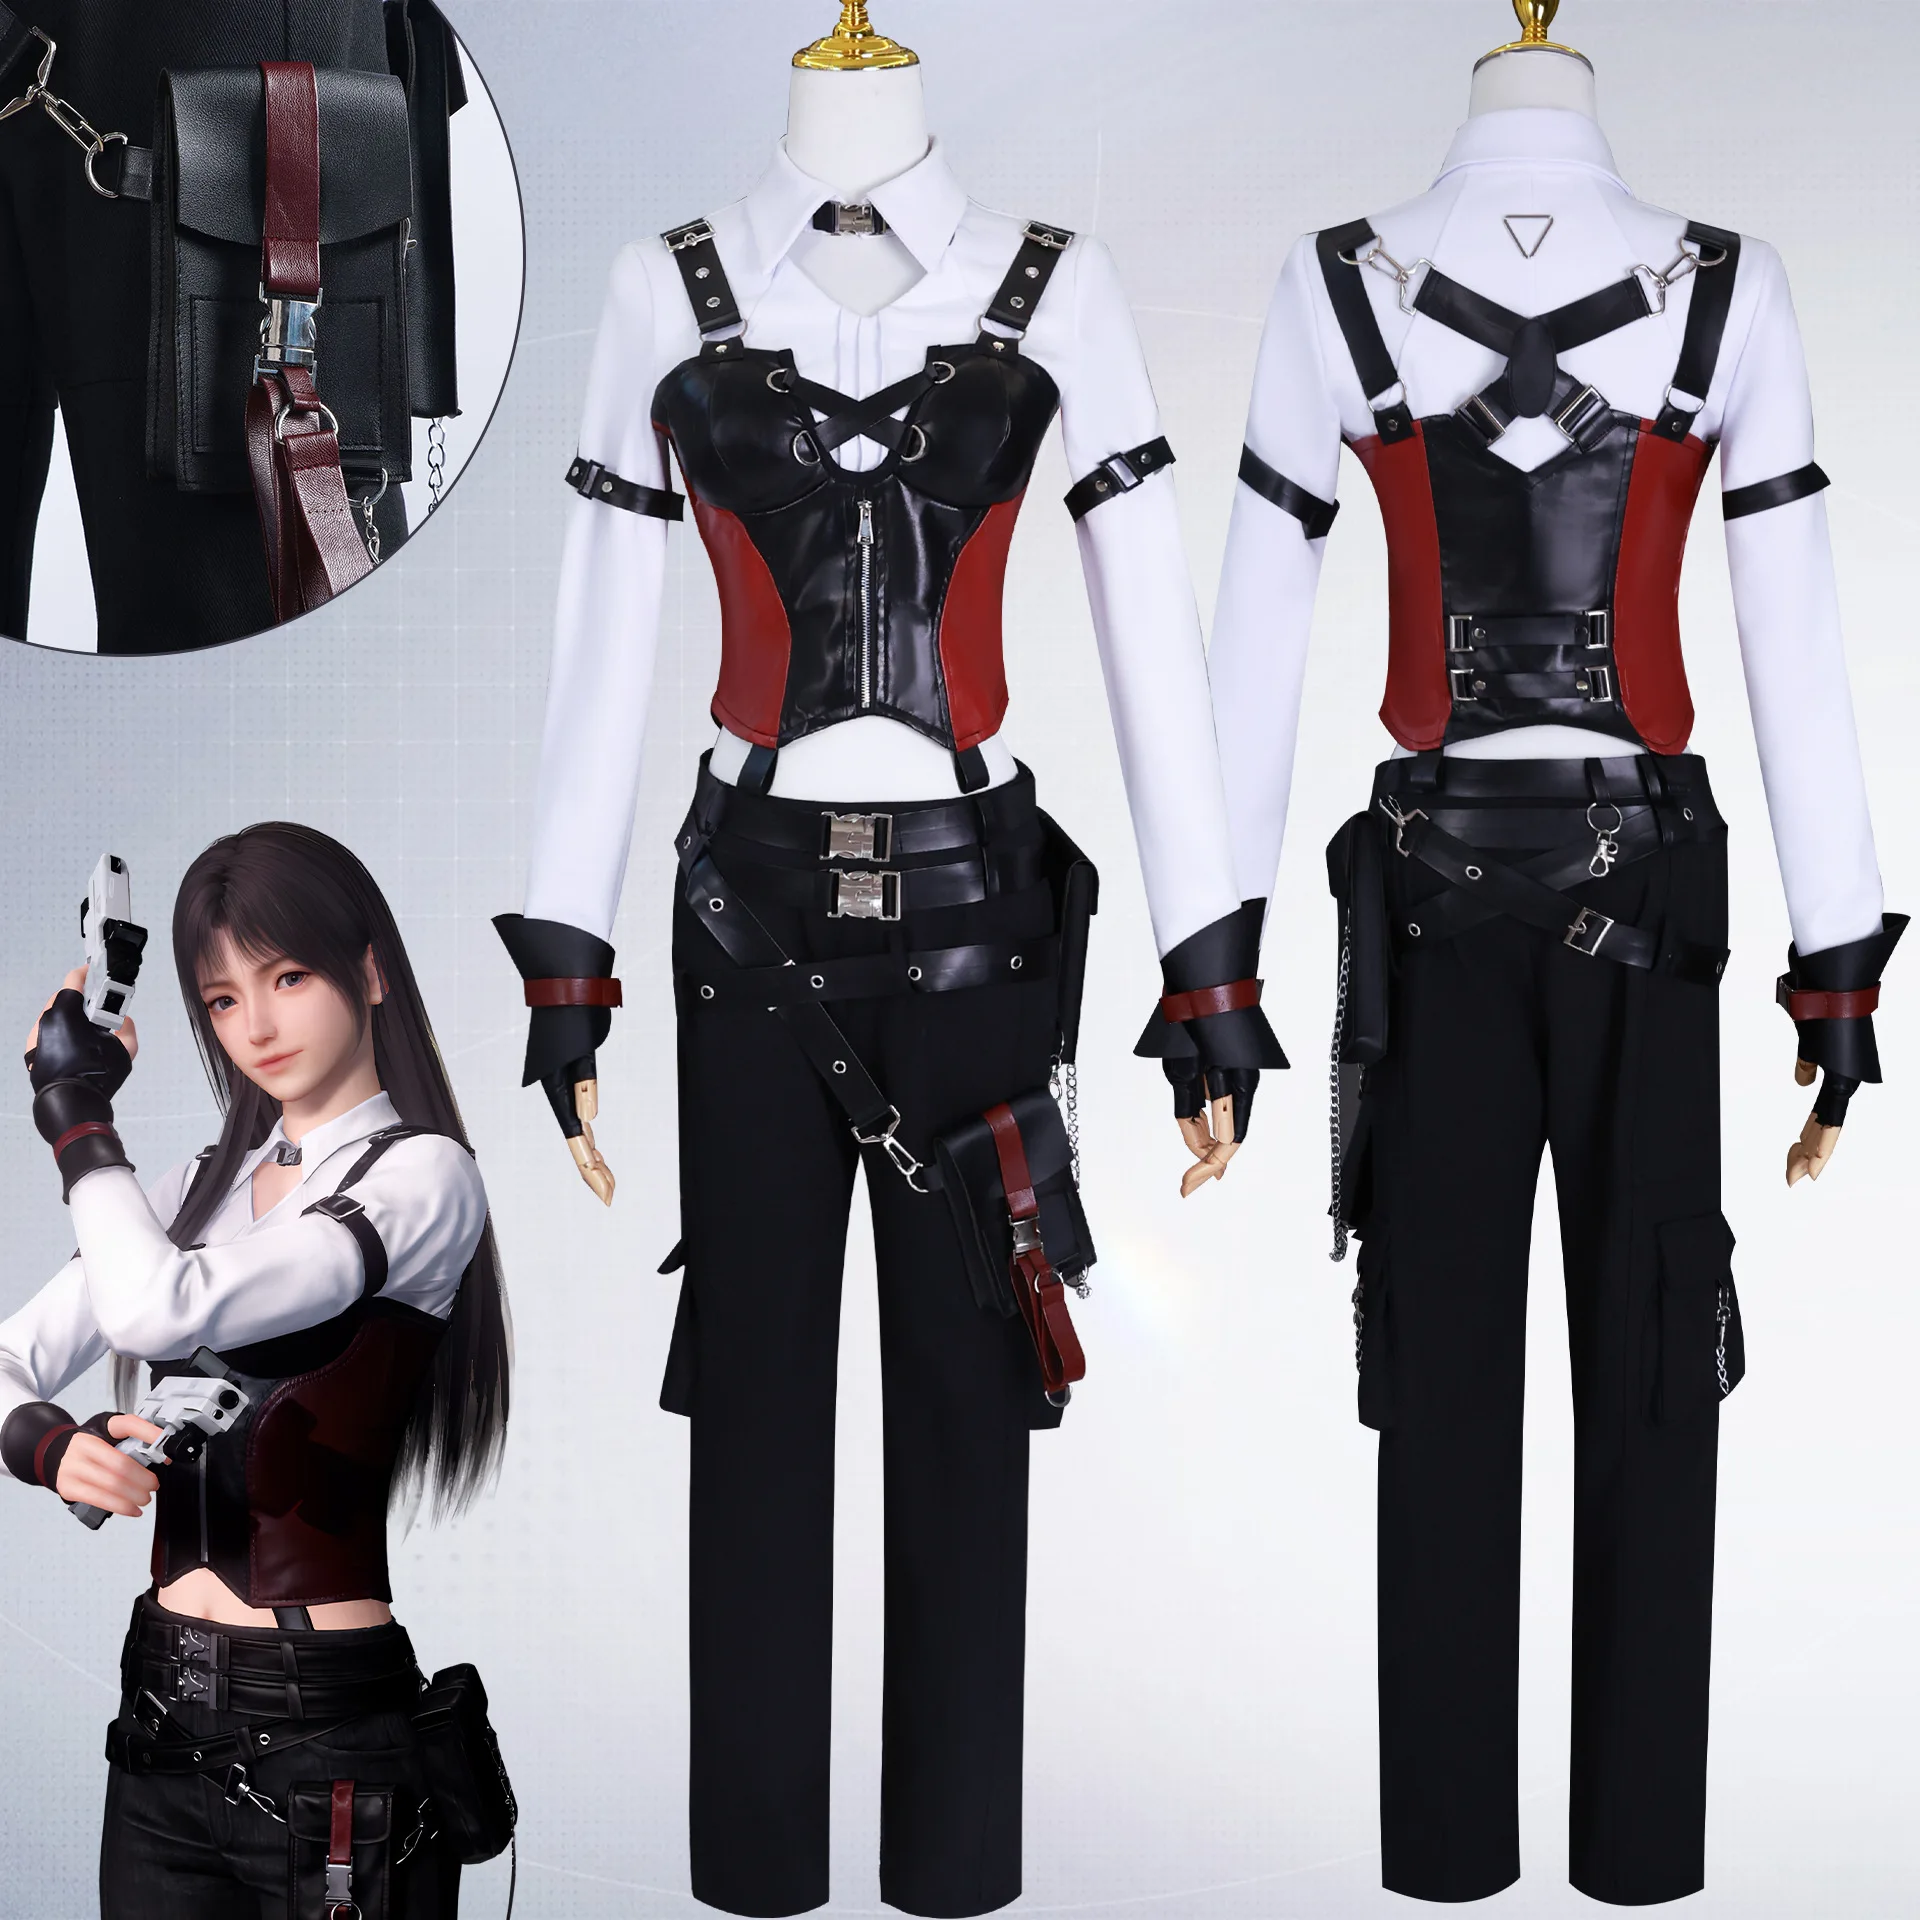 

Game Cosplay Miss Hunter Cosplay Costume Top Pant Coat Gloves Garment Woman Handsome Game Uniform